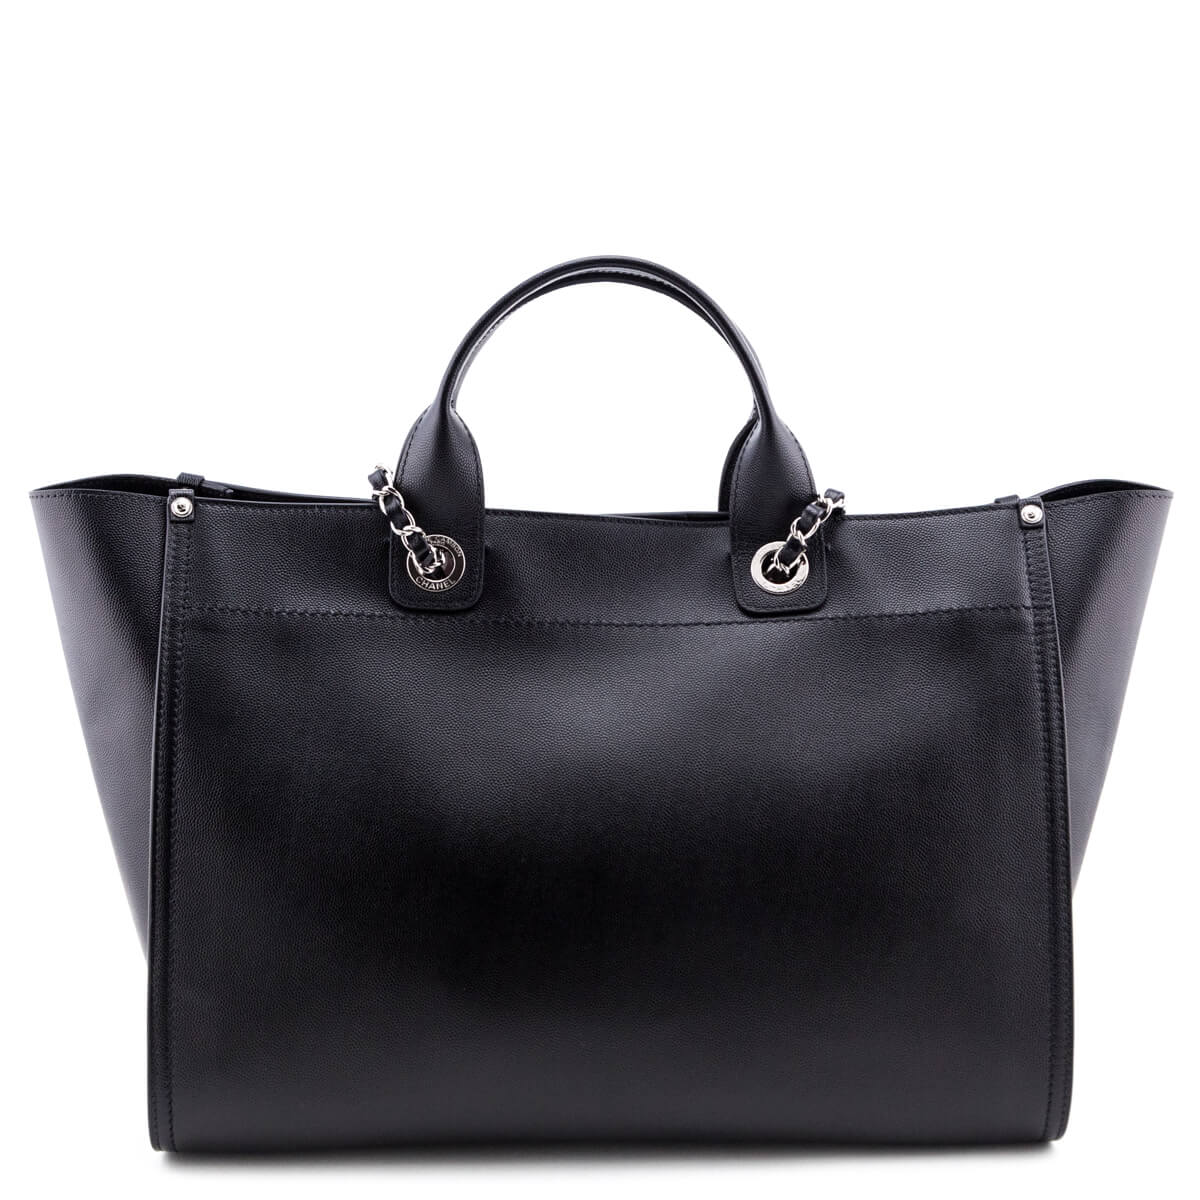 Chanel Black Grained Calfskin Large Deauville Tote SHW